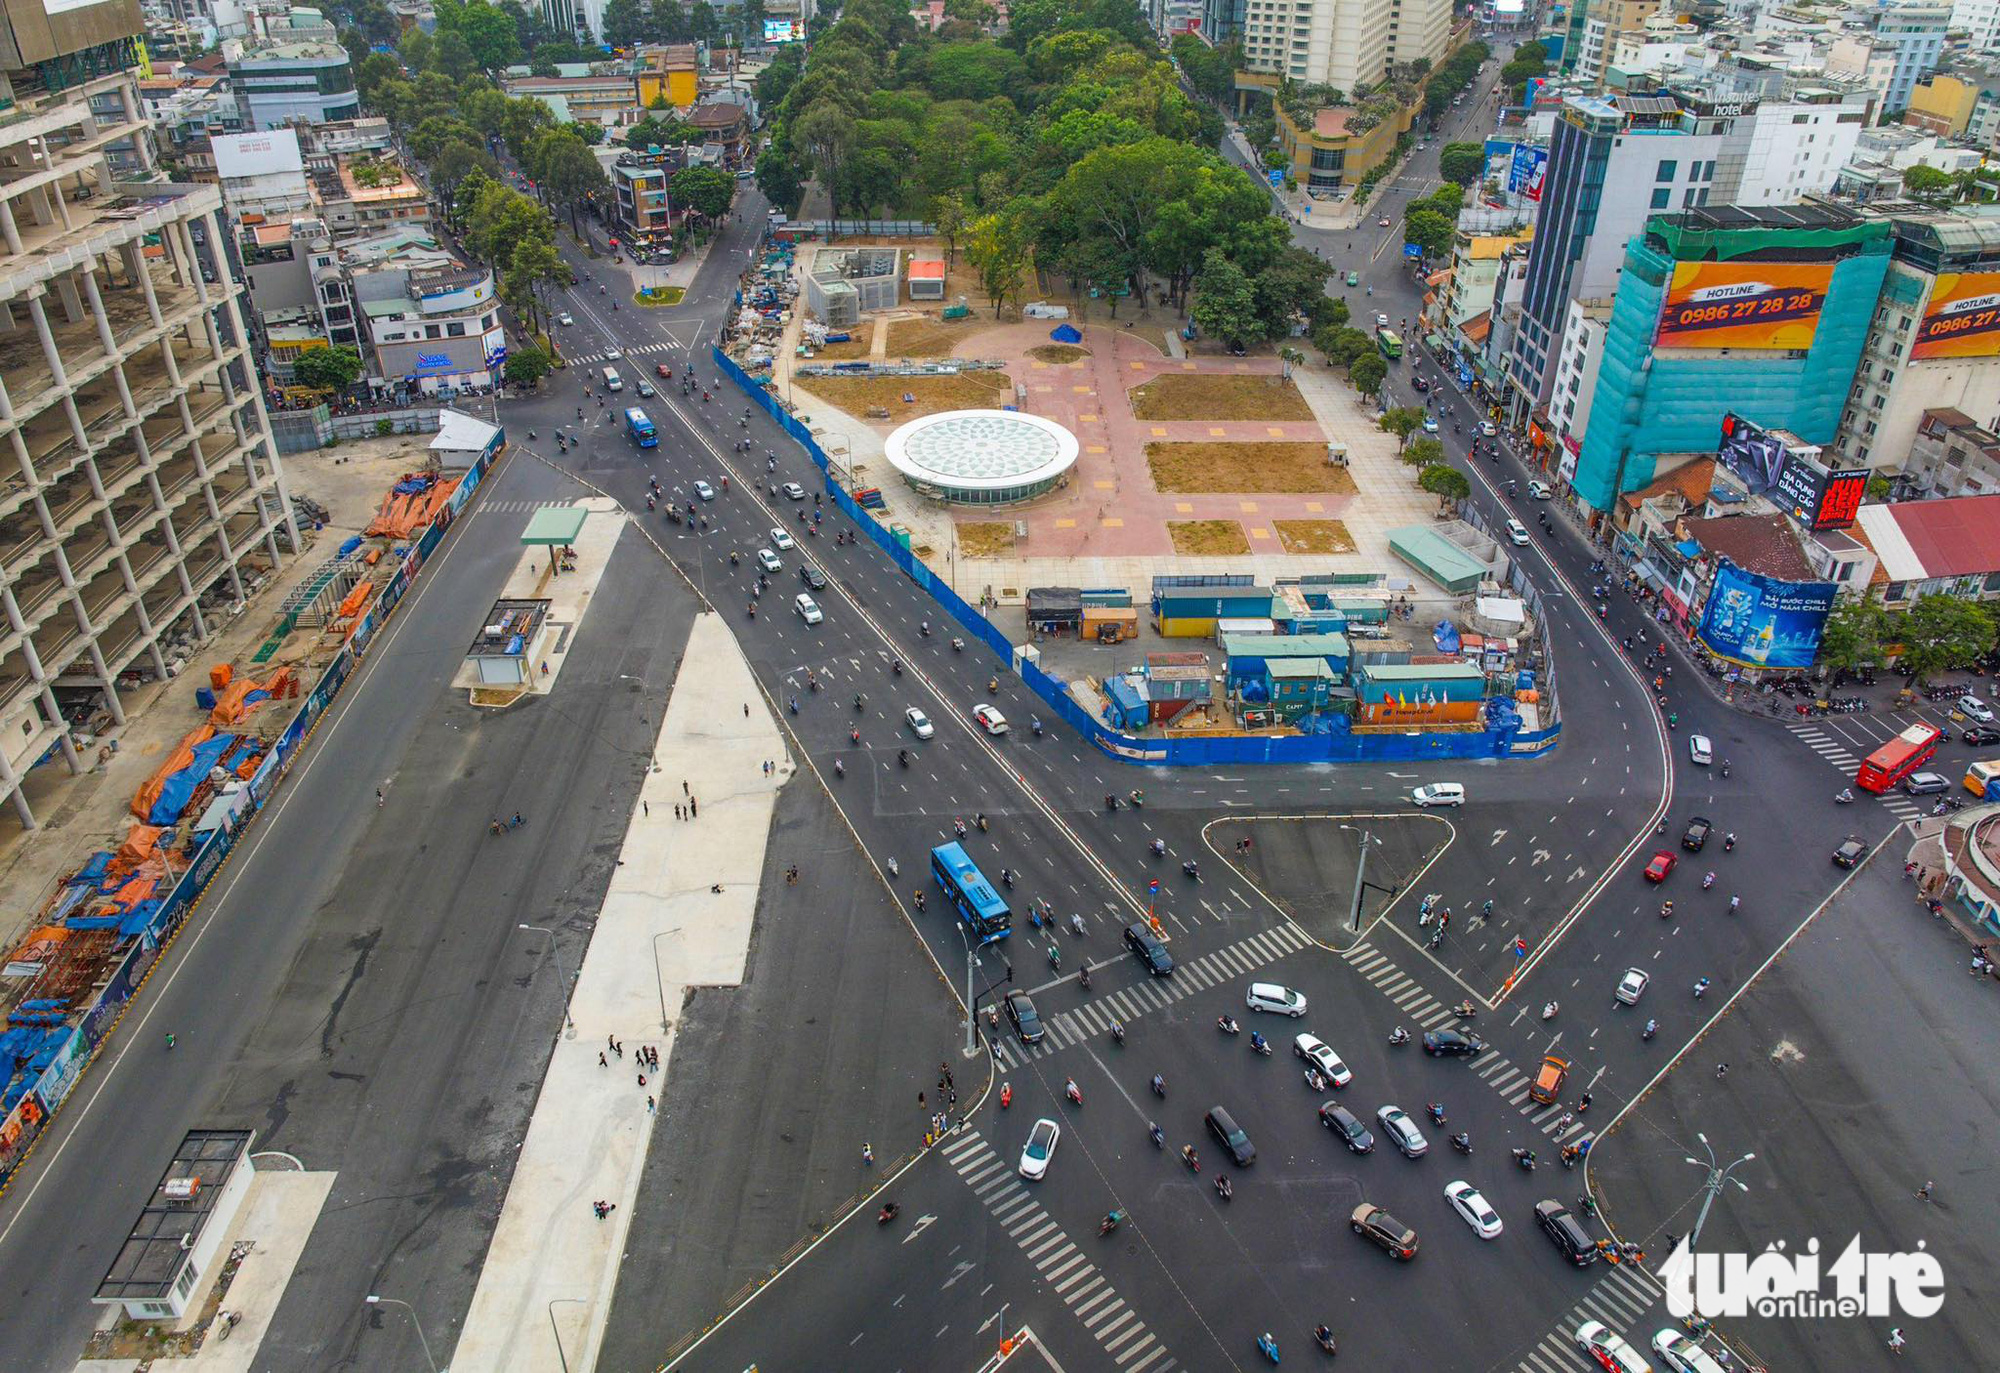 In late 2022, the space in front of Ben Thanh Market was returned and the roundabout there was turned into an intersection with traffic lights.